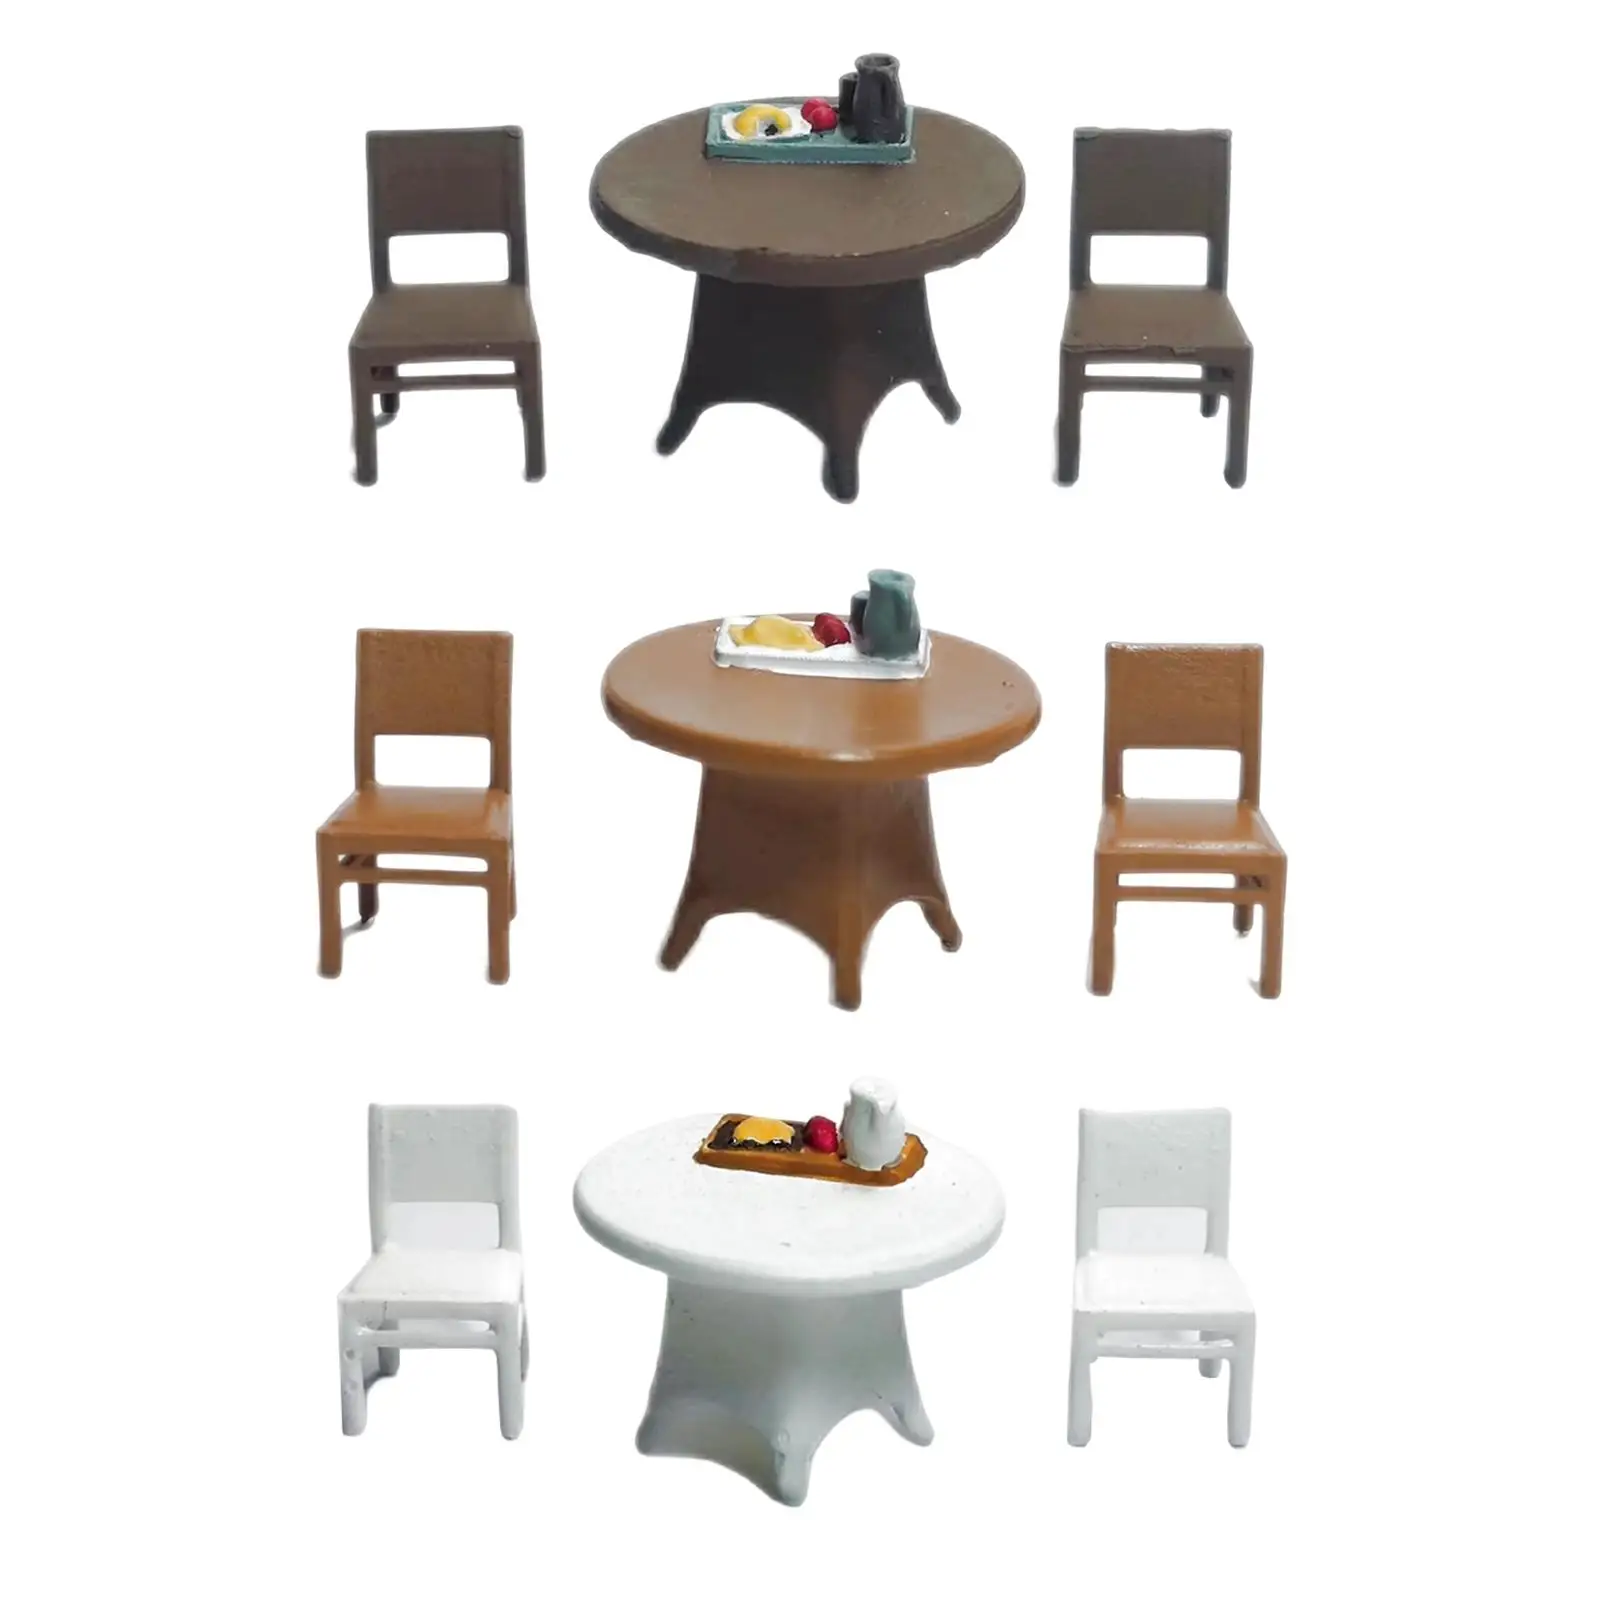 3 Pieces Hand Painted 1/64 Table and Chair Model with Food Tray Trains Architectural Sand Table Layout Decoration Miniature